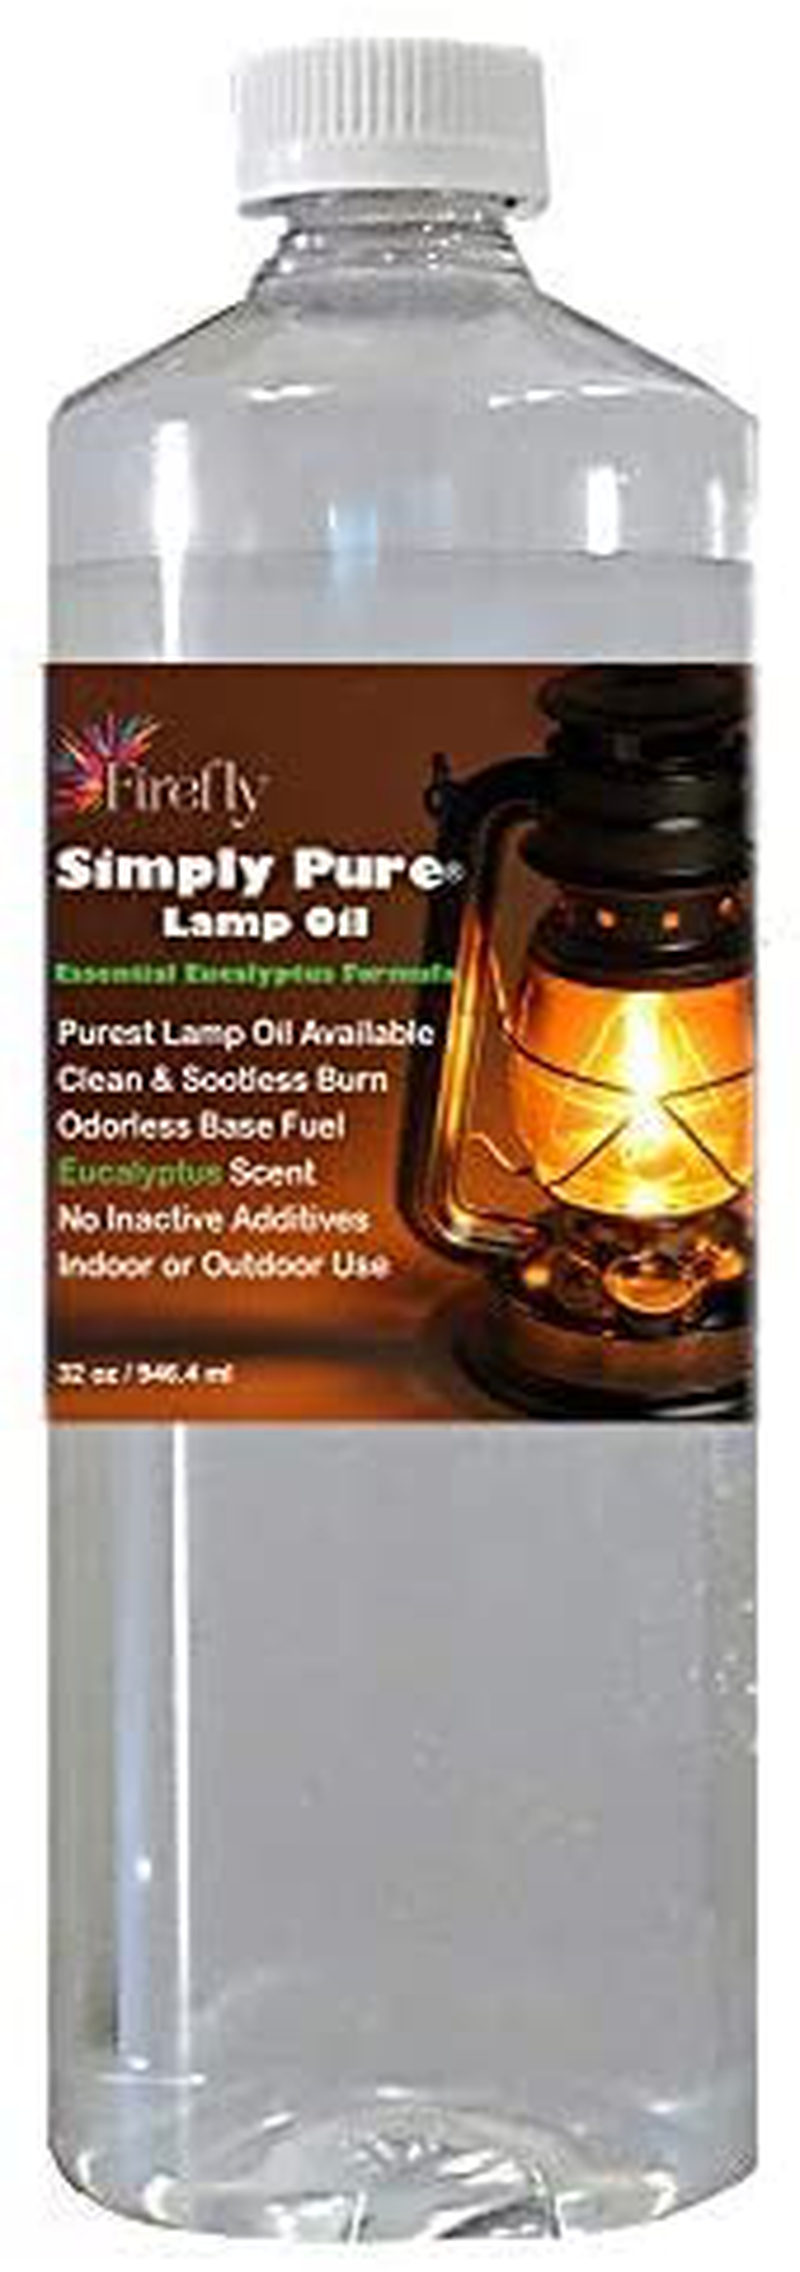 Firefly Kosher Candle and Lamp Oil - Smokeless & Odorless Base - Eucalyptus Scent - Ultra Clean Burning - Liquid Paraffin Fuel - Highest Purity Available - 32 oz Home & Garden > Lighting Accessories > Oil Lamp Fuel Firefly Fuel, Inc. 32 Ounces  